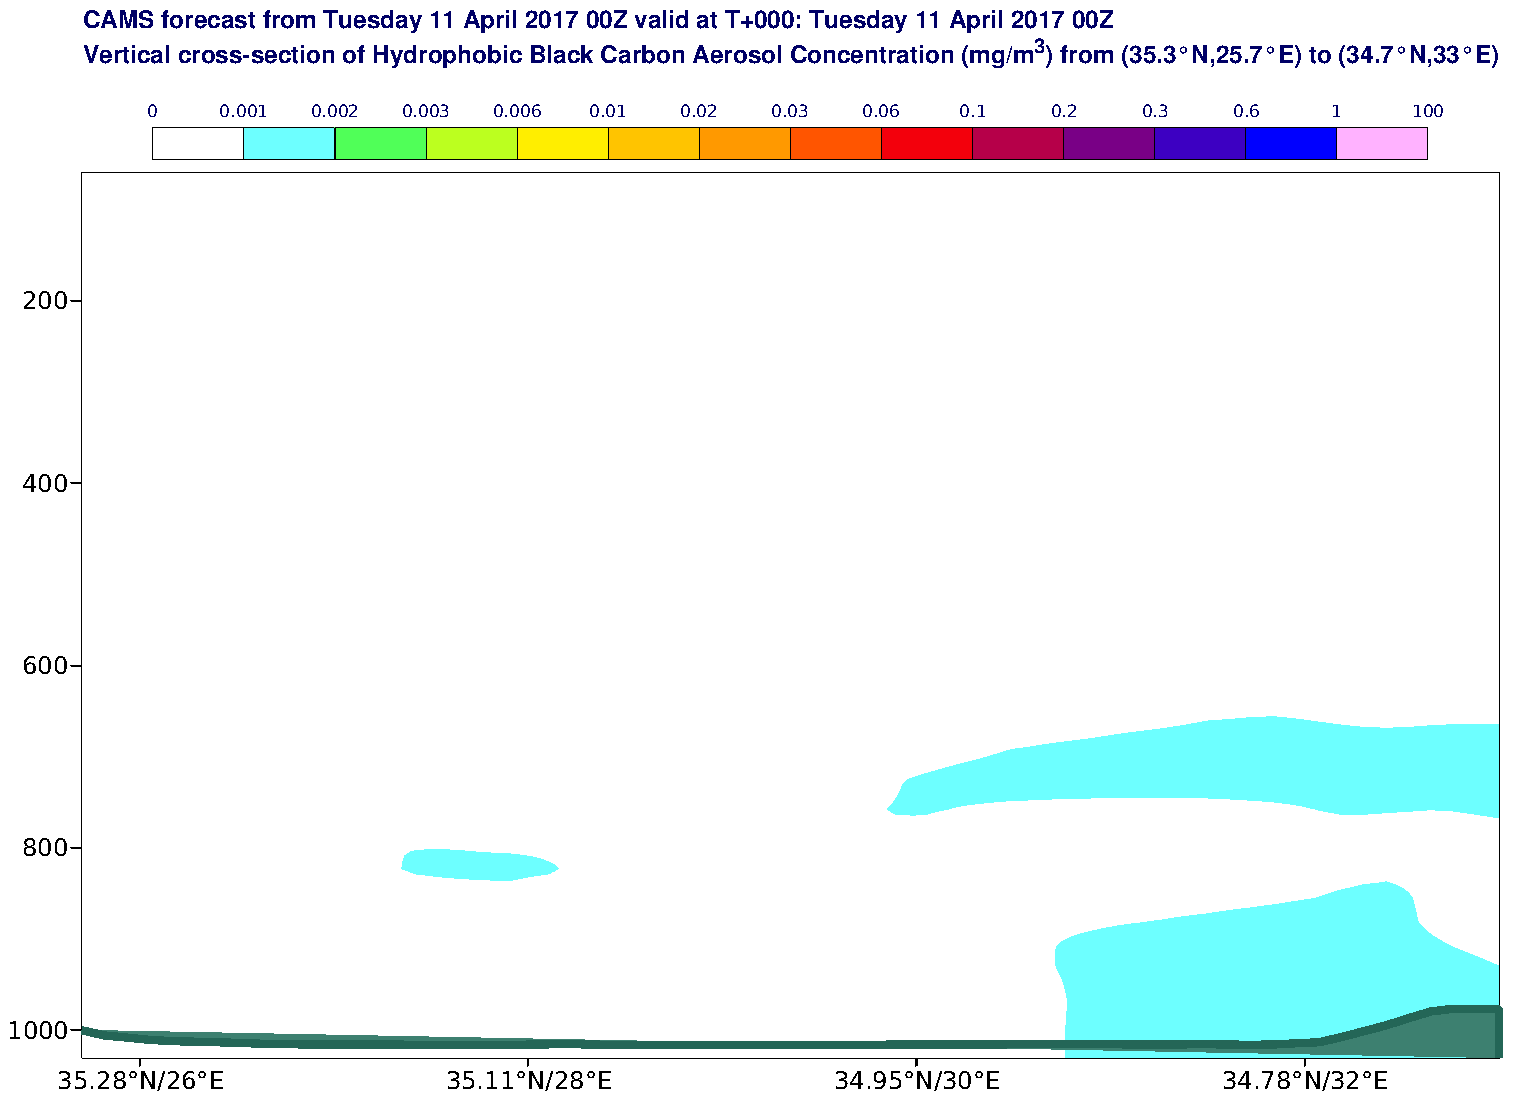 Vertical cross-section of Hydrophobic Black Carbon Aerosol Concentration (mg/m3) valid at T0 - 2017-04-11 00:00